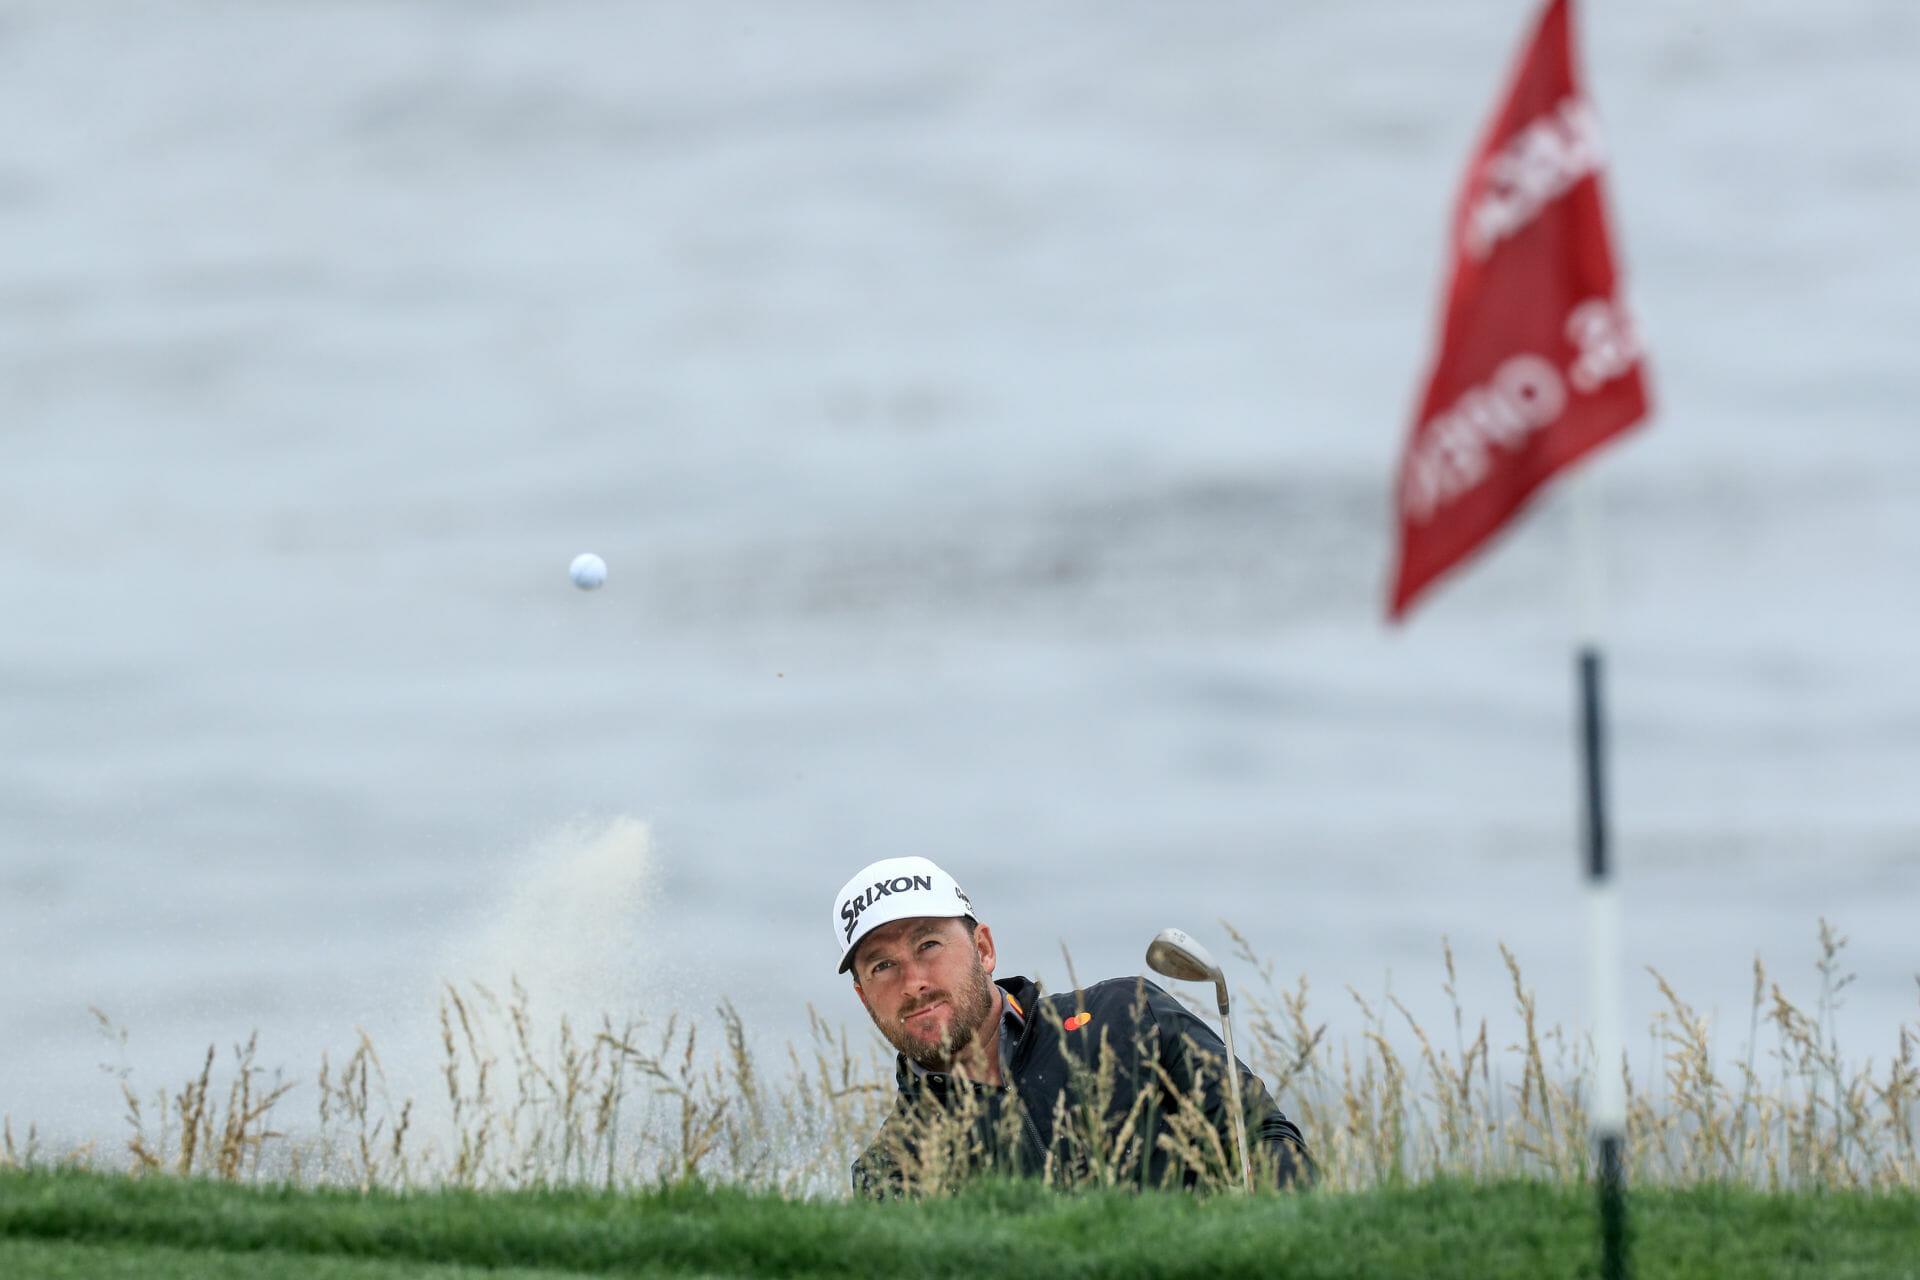 GMac six back after recovering from ‘smack in the face’